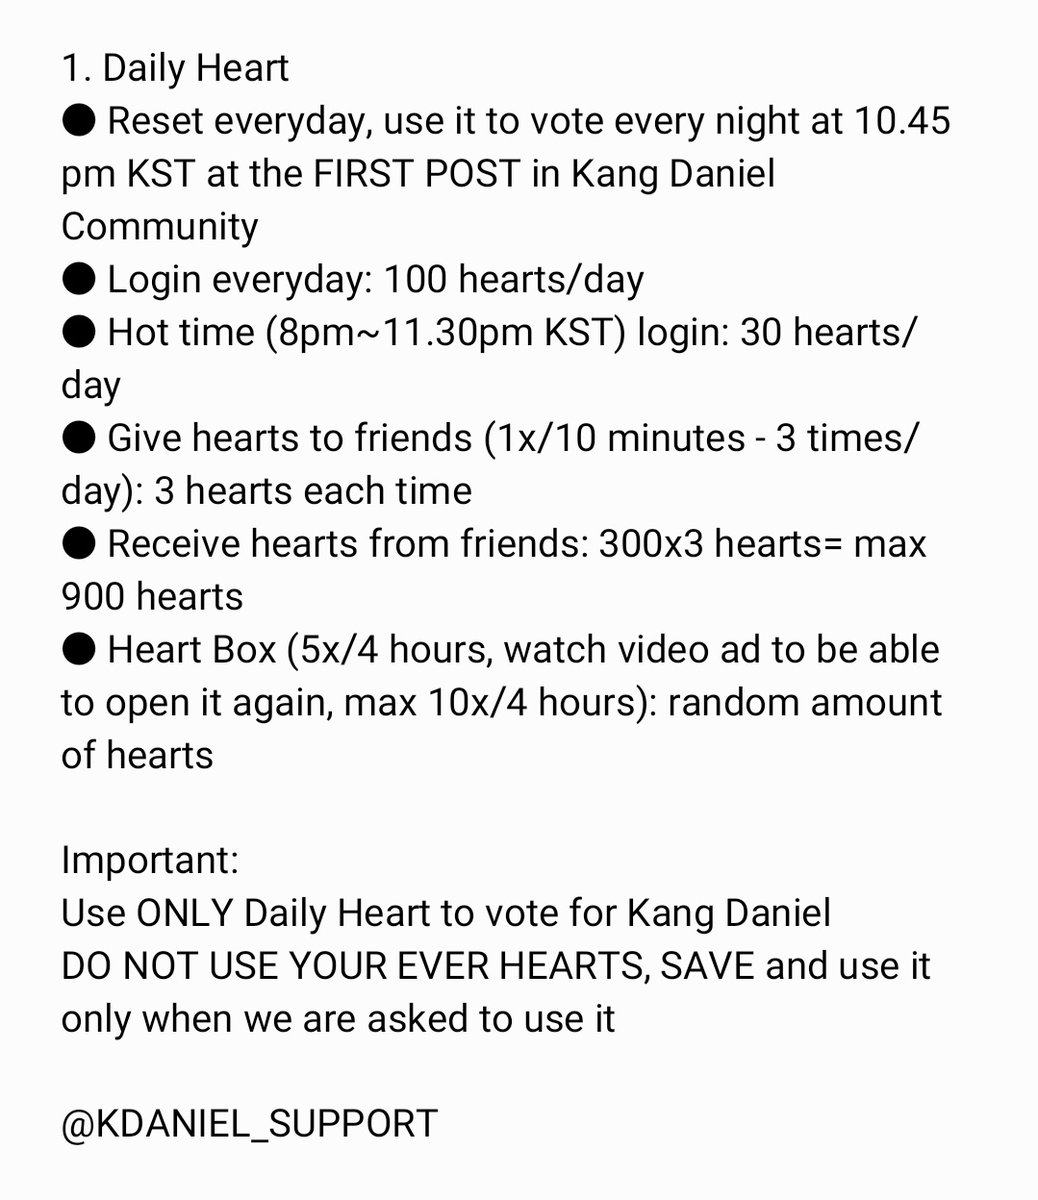 Danity!Kang Daniel is up against BG, so please install choeadol if you haven'tUse this tutorial if you don't know how to do it:  https://bit.ly/2Bgvqi8 Keep collecting Daily & Ever Hearts everydayOnly use DAILY HEARTS to vote unless we are asked to use ever hearts